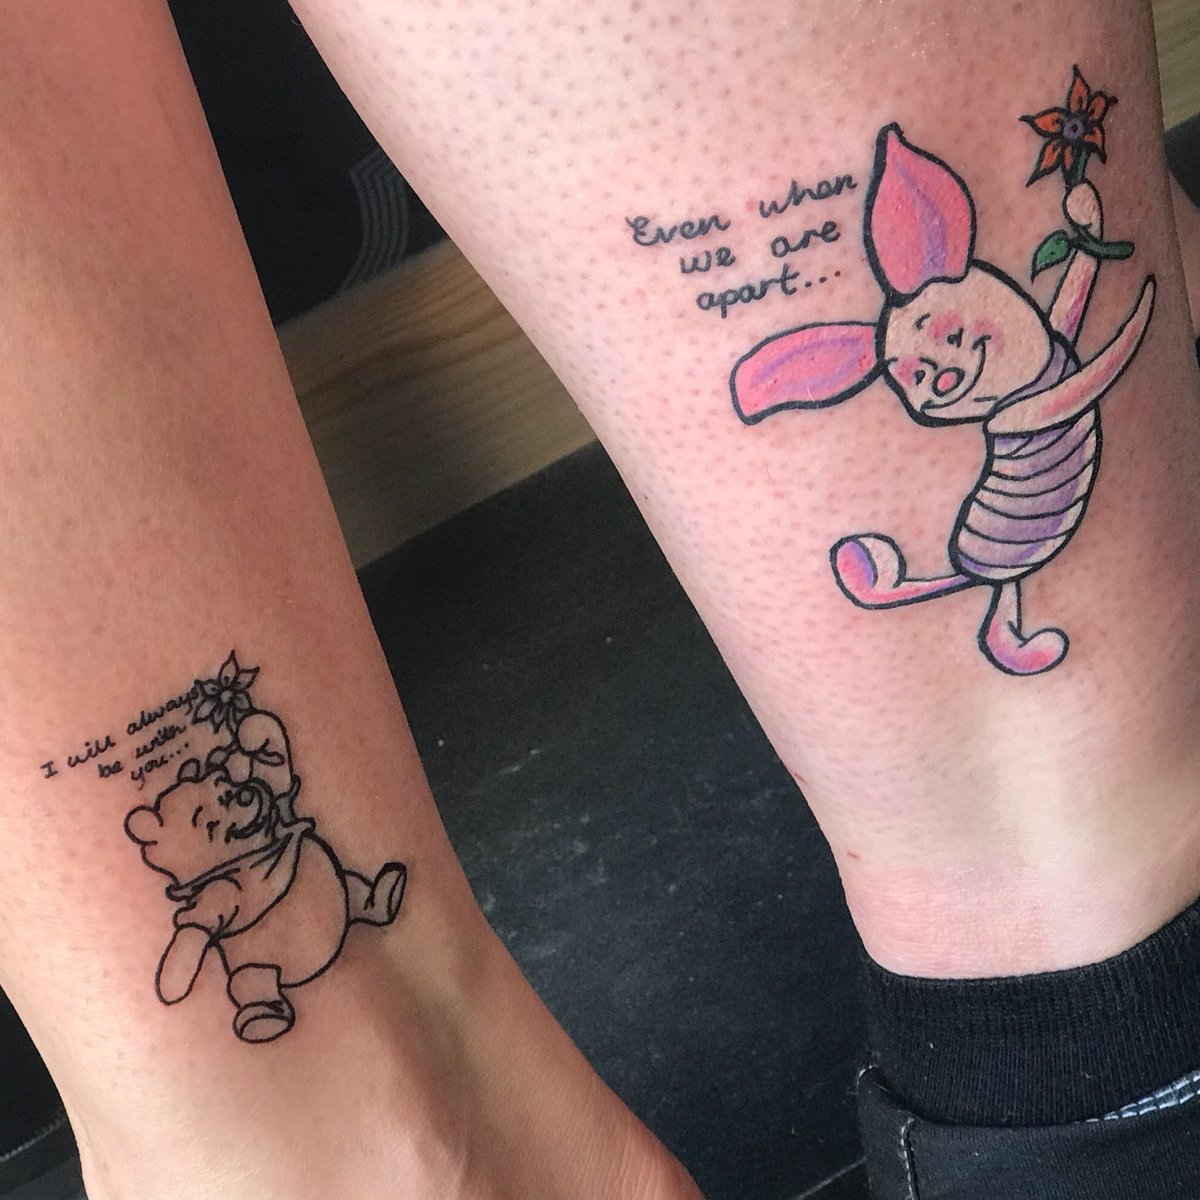 The Disney Tattoo Part Deux: Think You Could Ever Get a Disney Tattoo? |  Mouze Kateerz